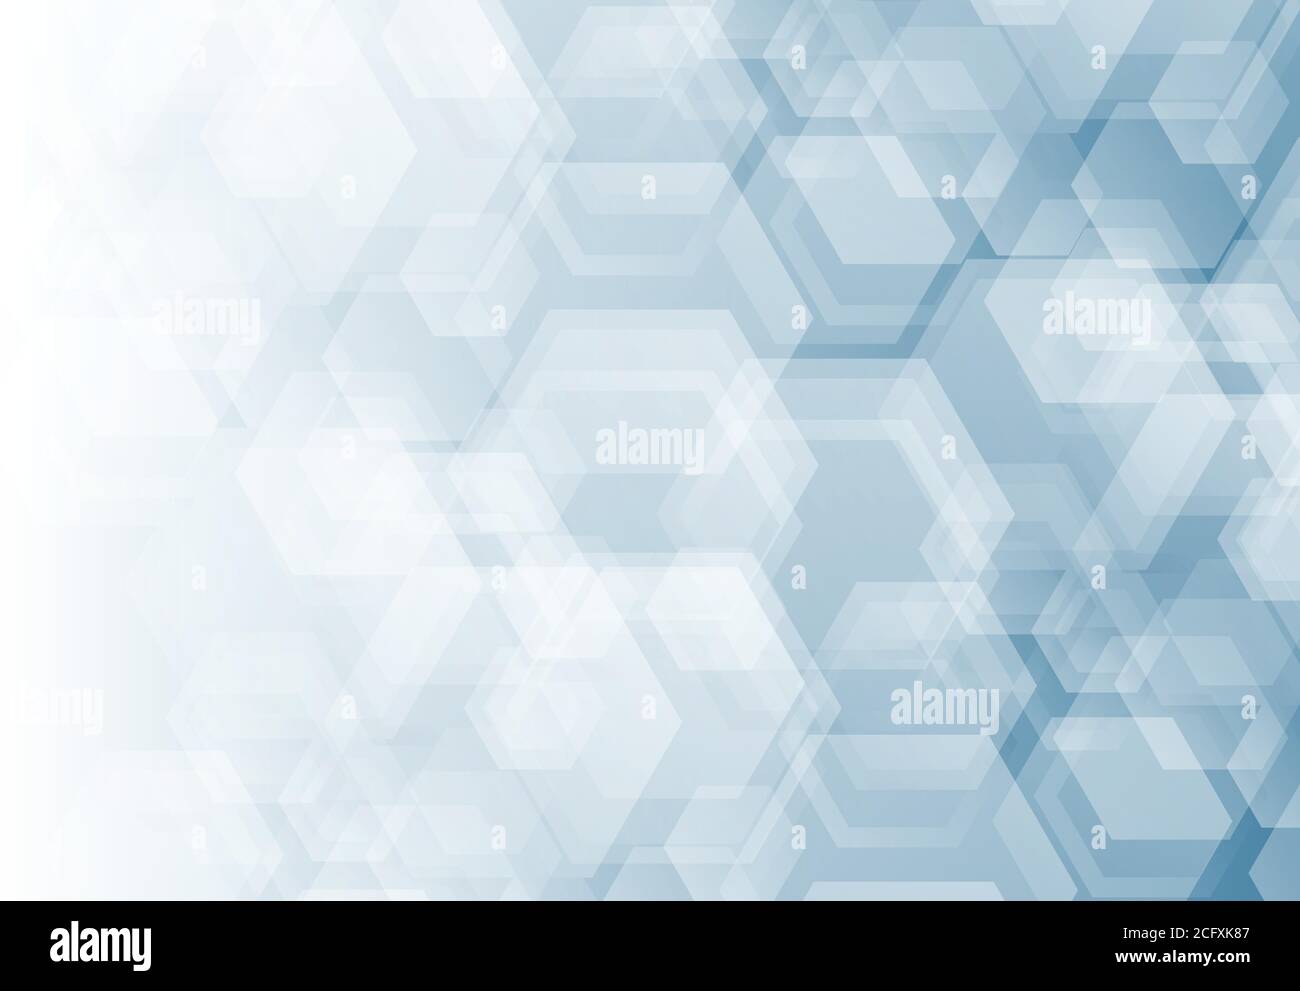 Abstract gradient white and blue design template with hexagonal pattern design technology background. Use for ad, poster, artwork, template design, Stock Vector